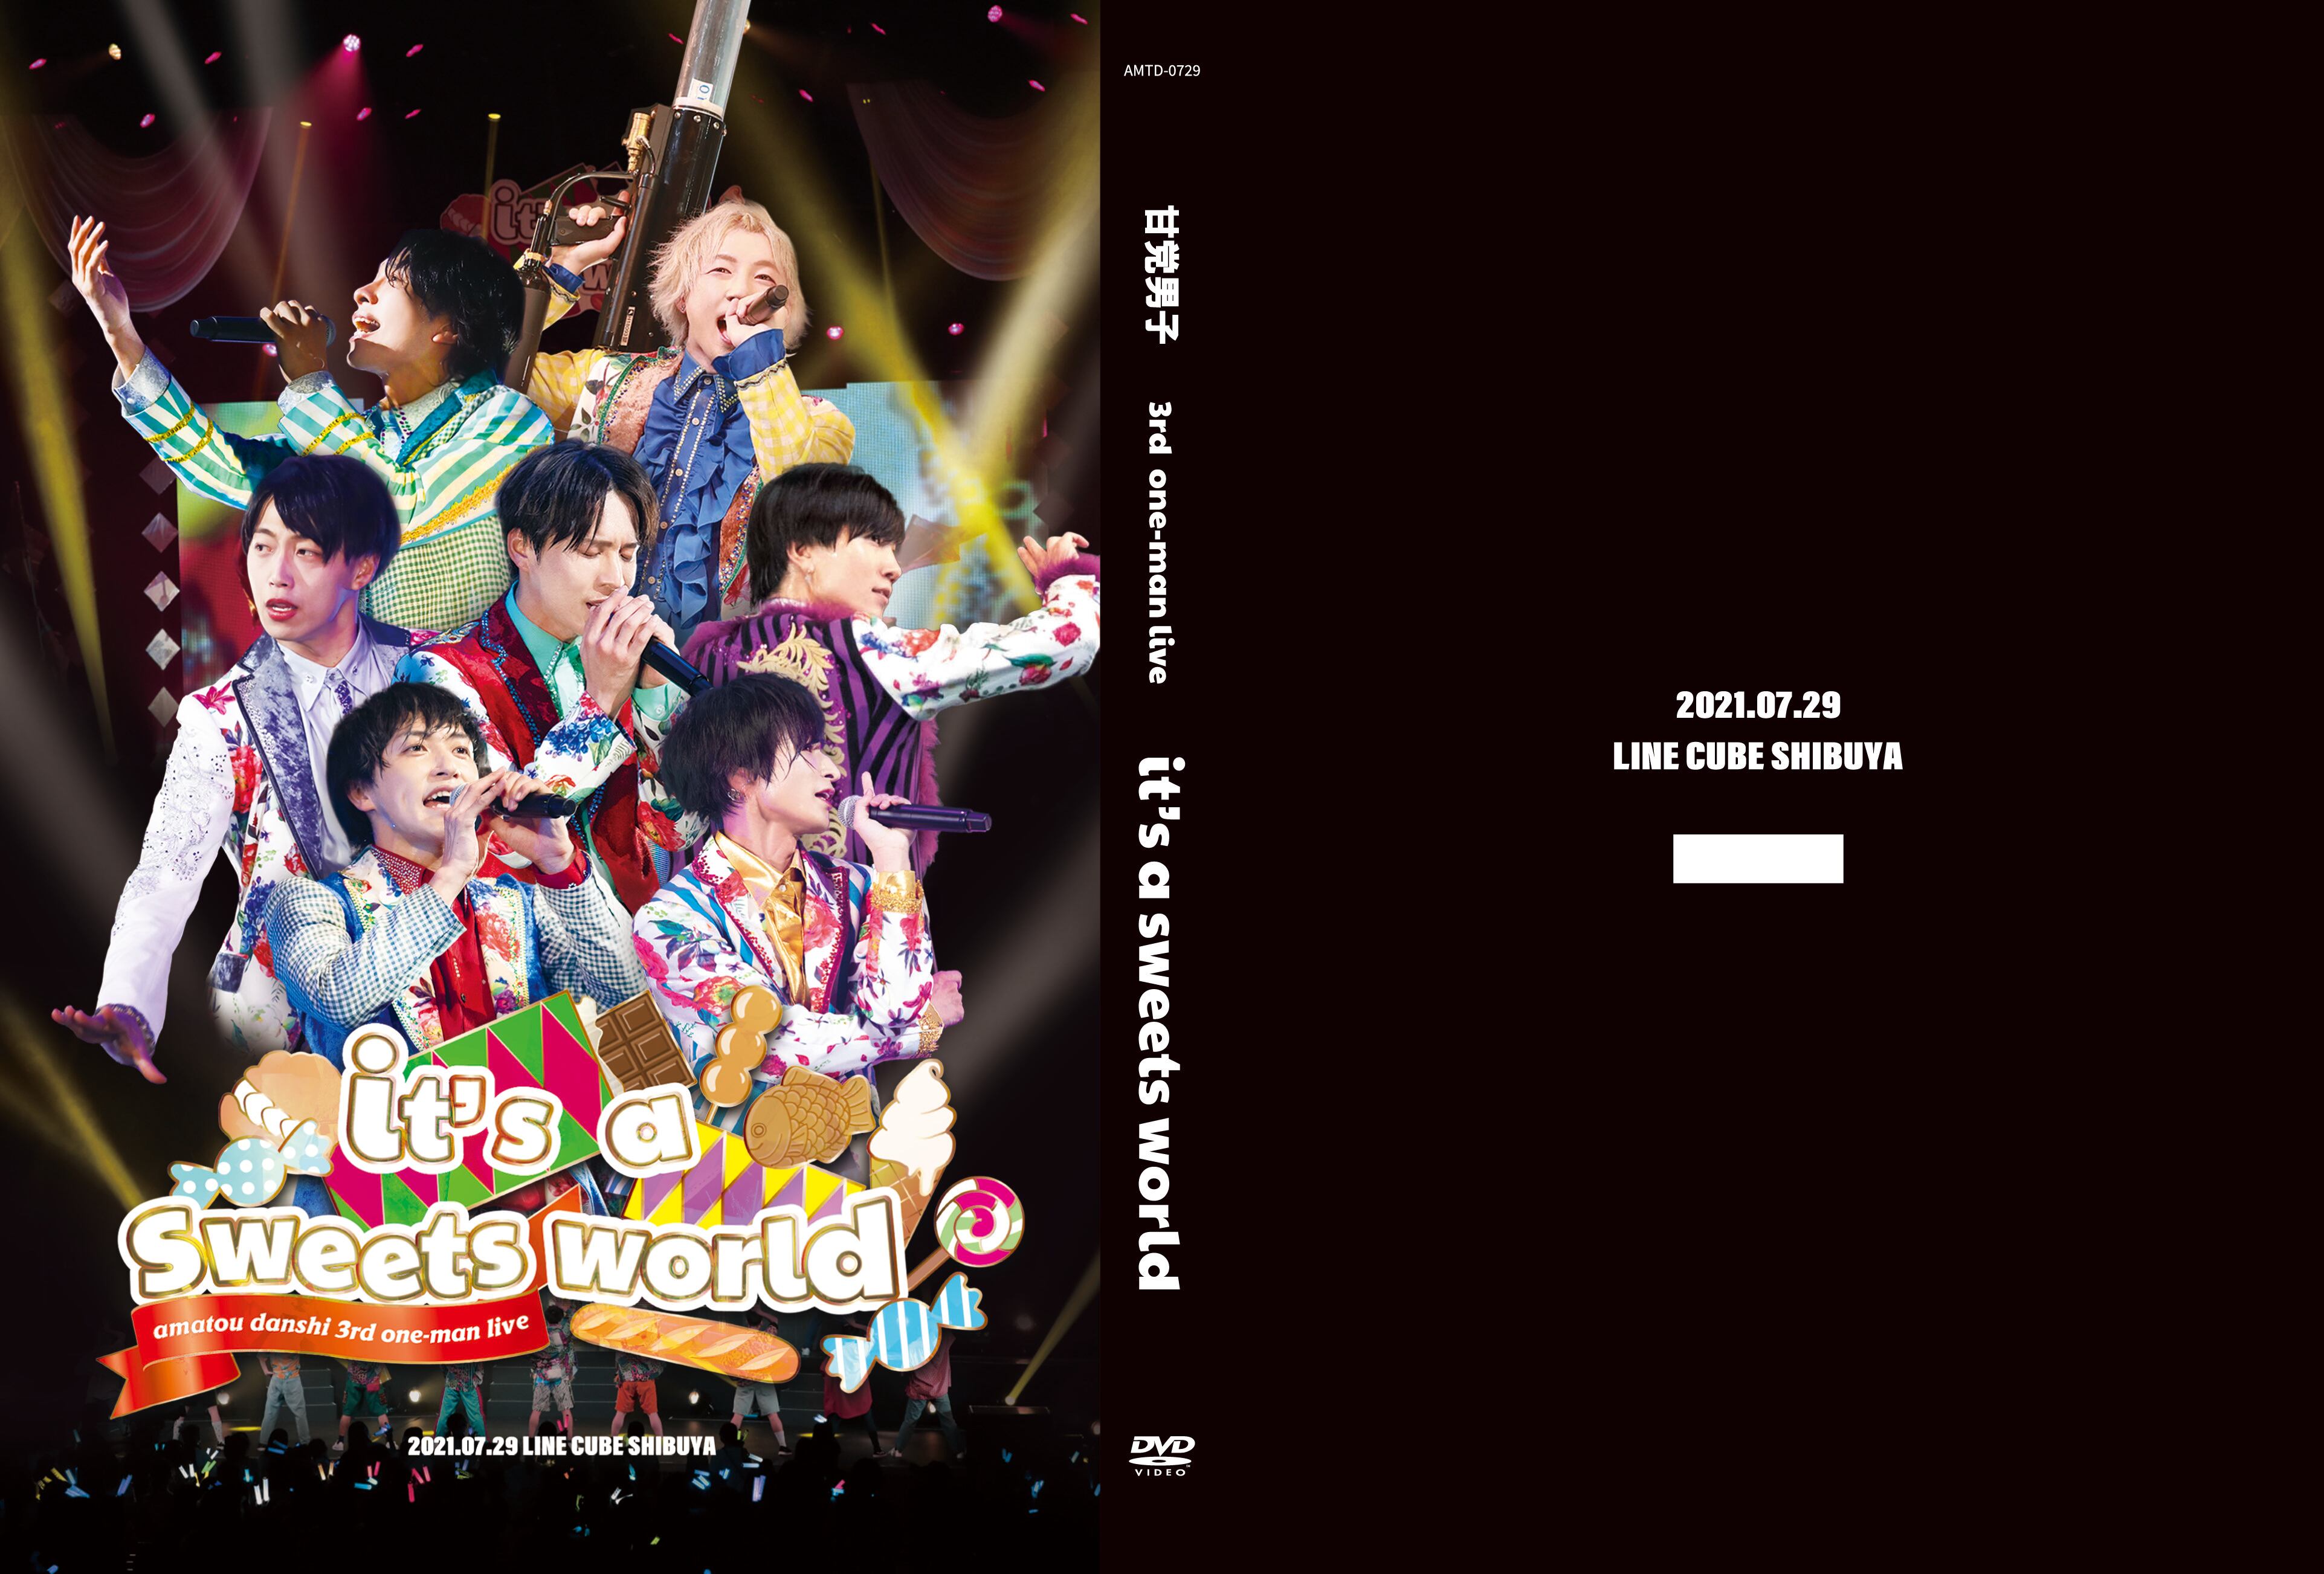 DVD 甘党男子 3rd one-man live it's a sweets world